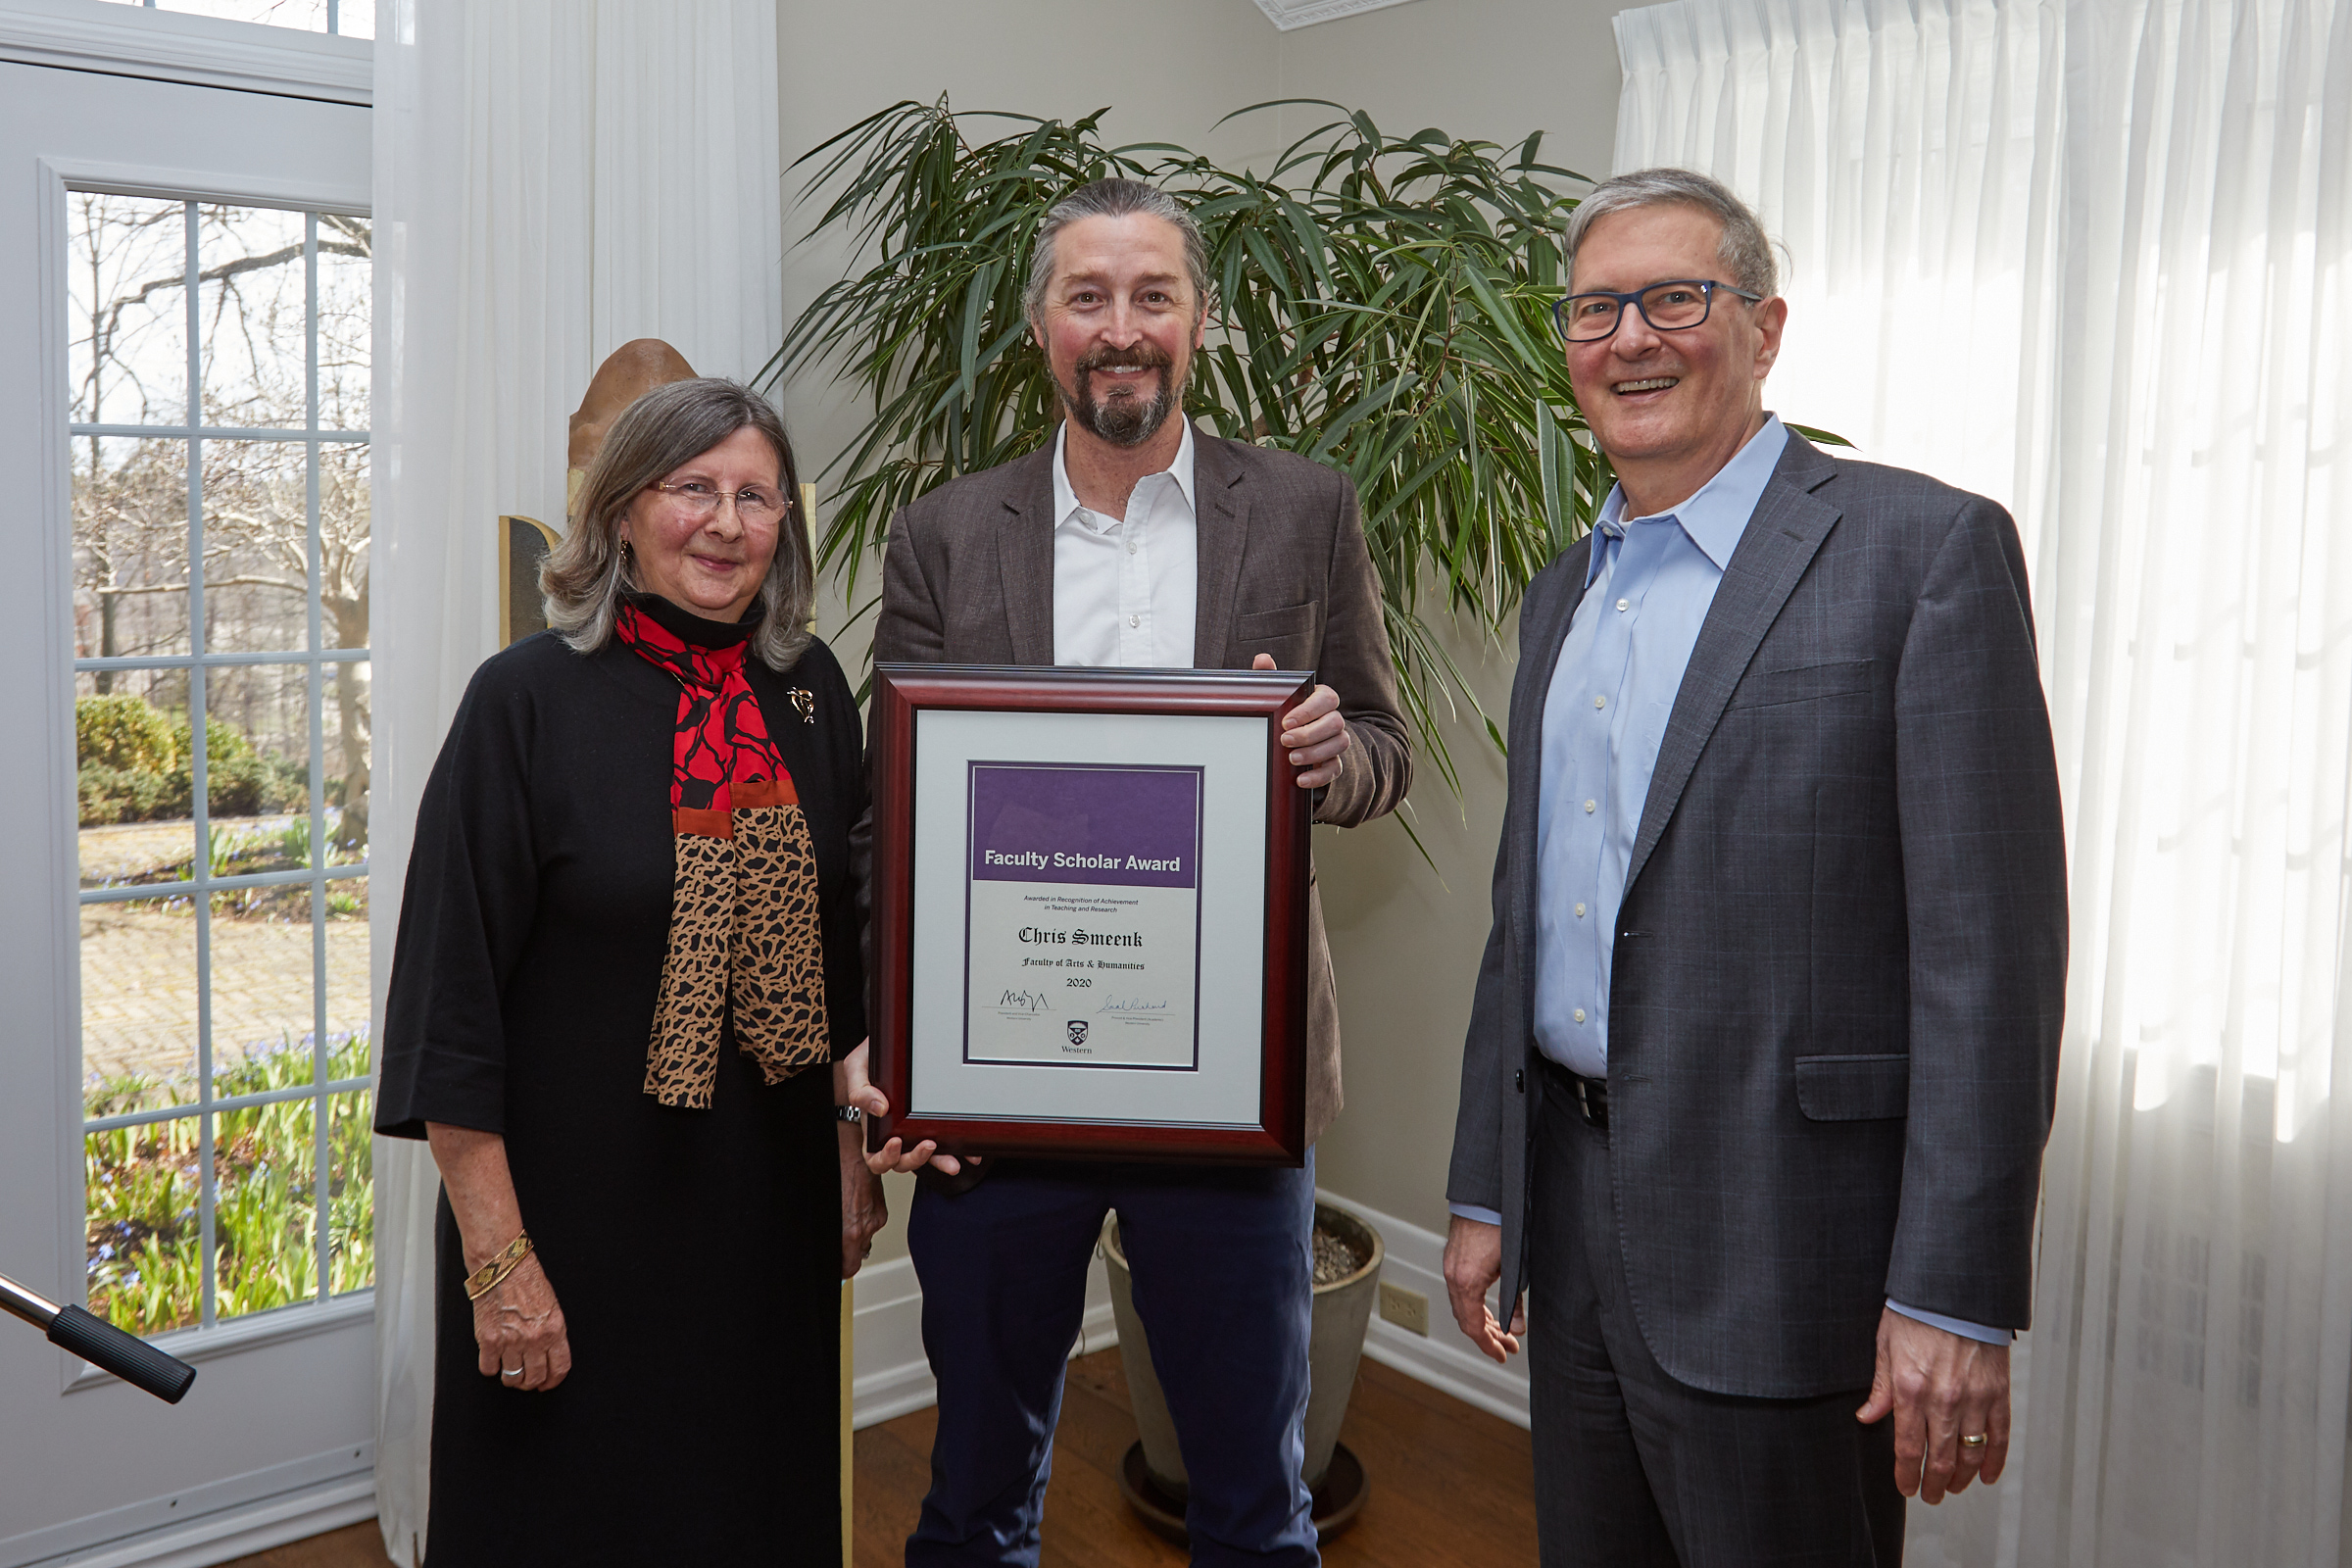 Chris Smeenk holds his faculty scholar award with Sarah Pritchard, and Alan Shepard, Western University Provost and President, respectively